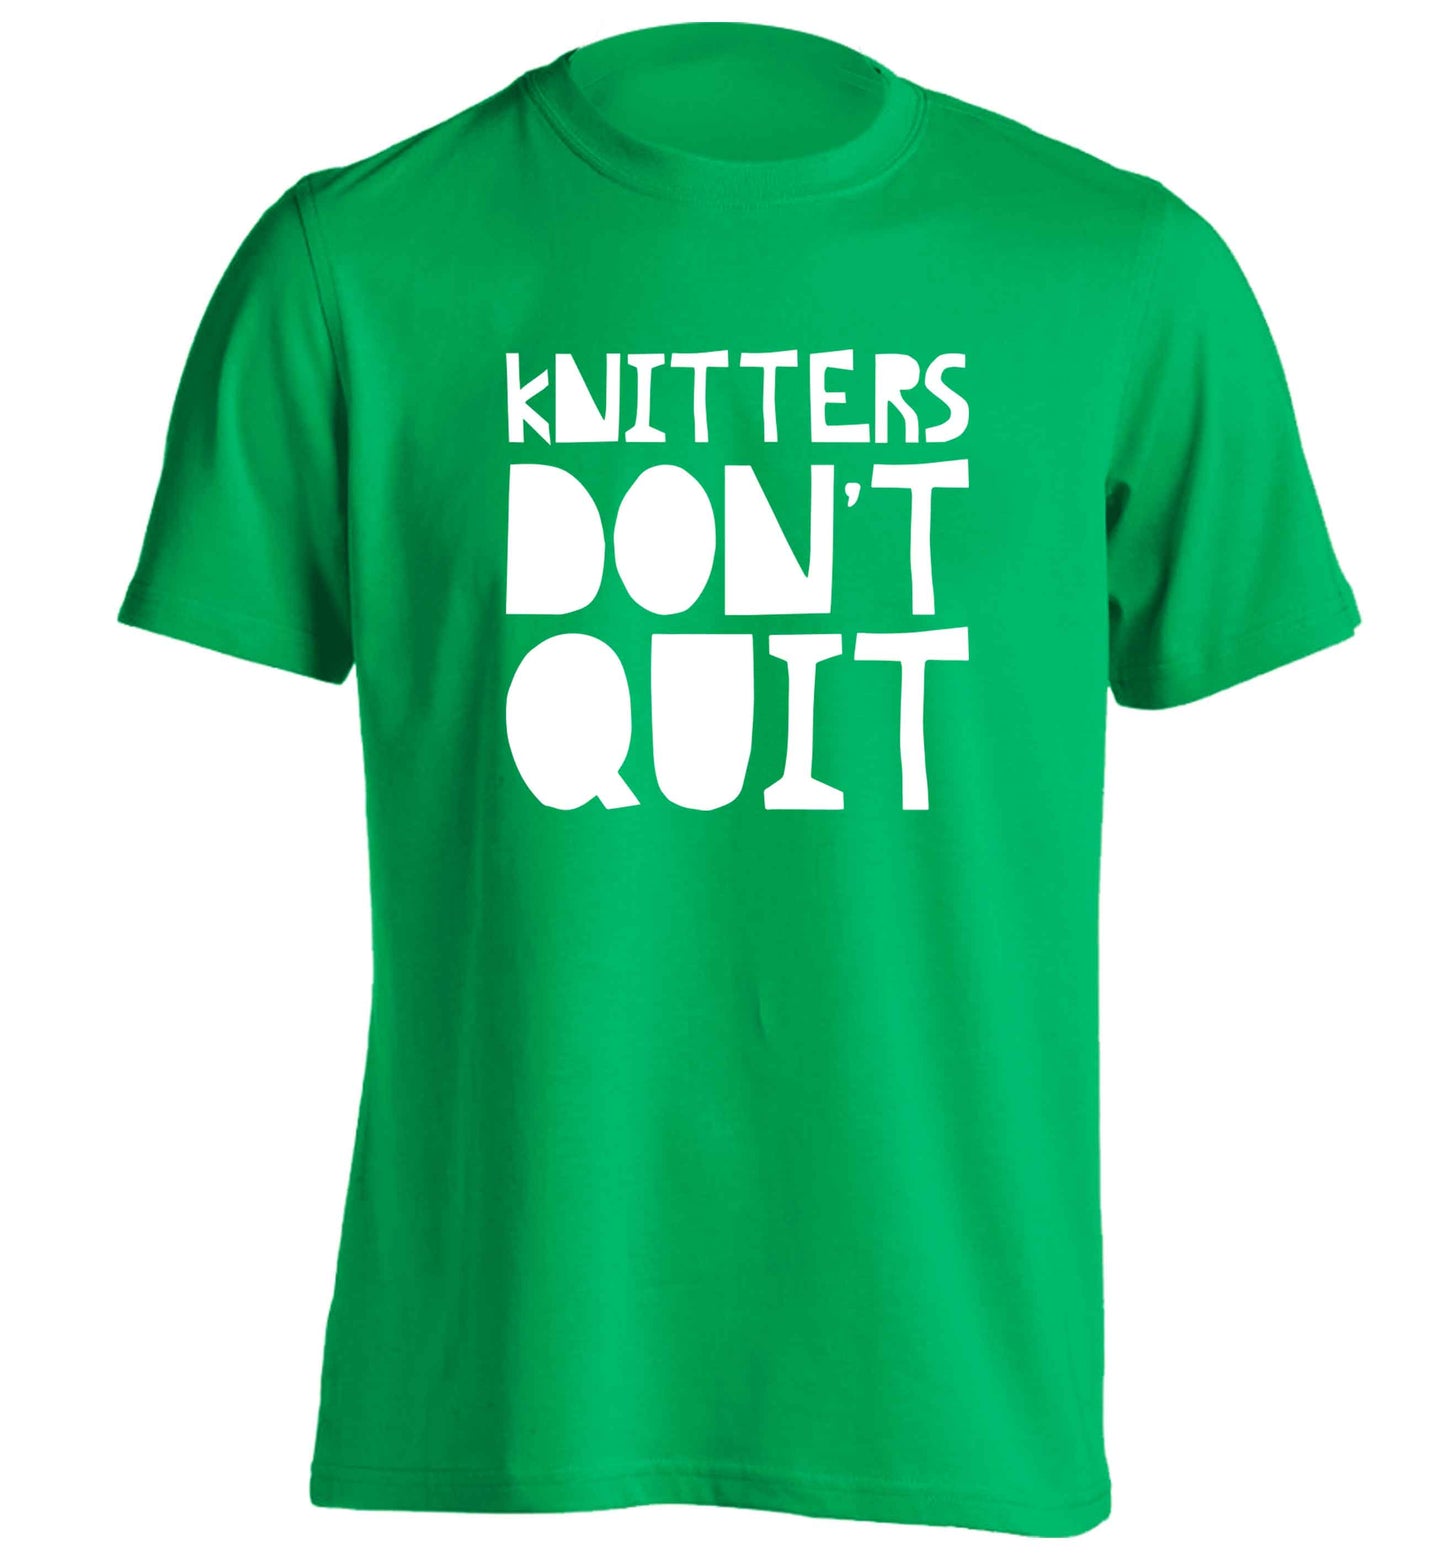 Knitters don't quit adults unisex green Tshirt 2XL